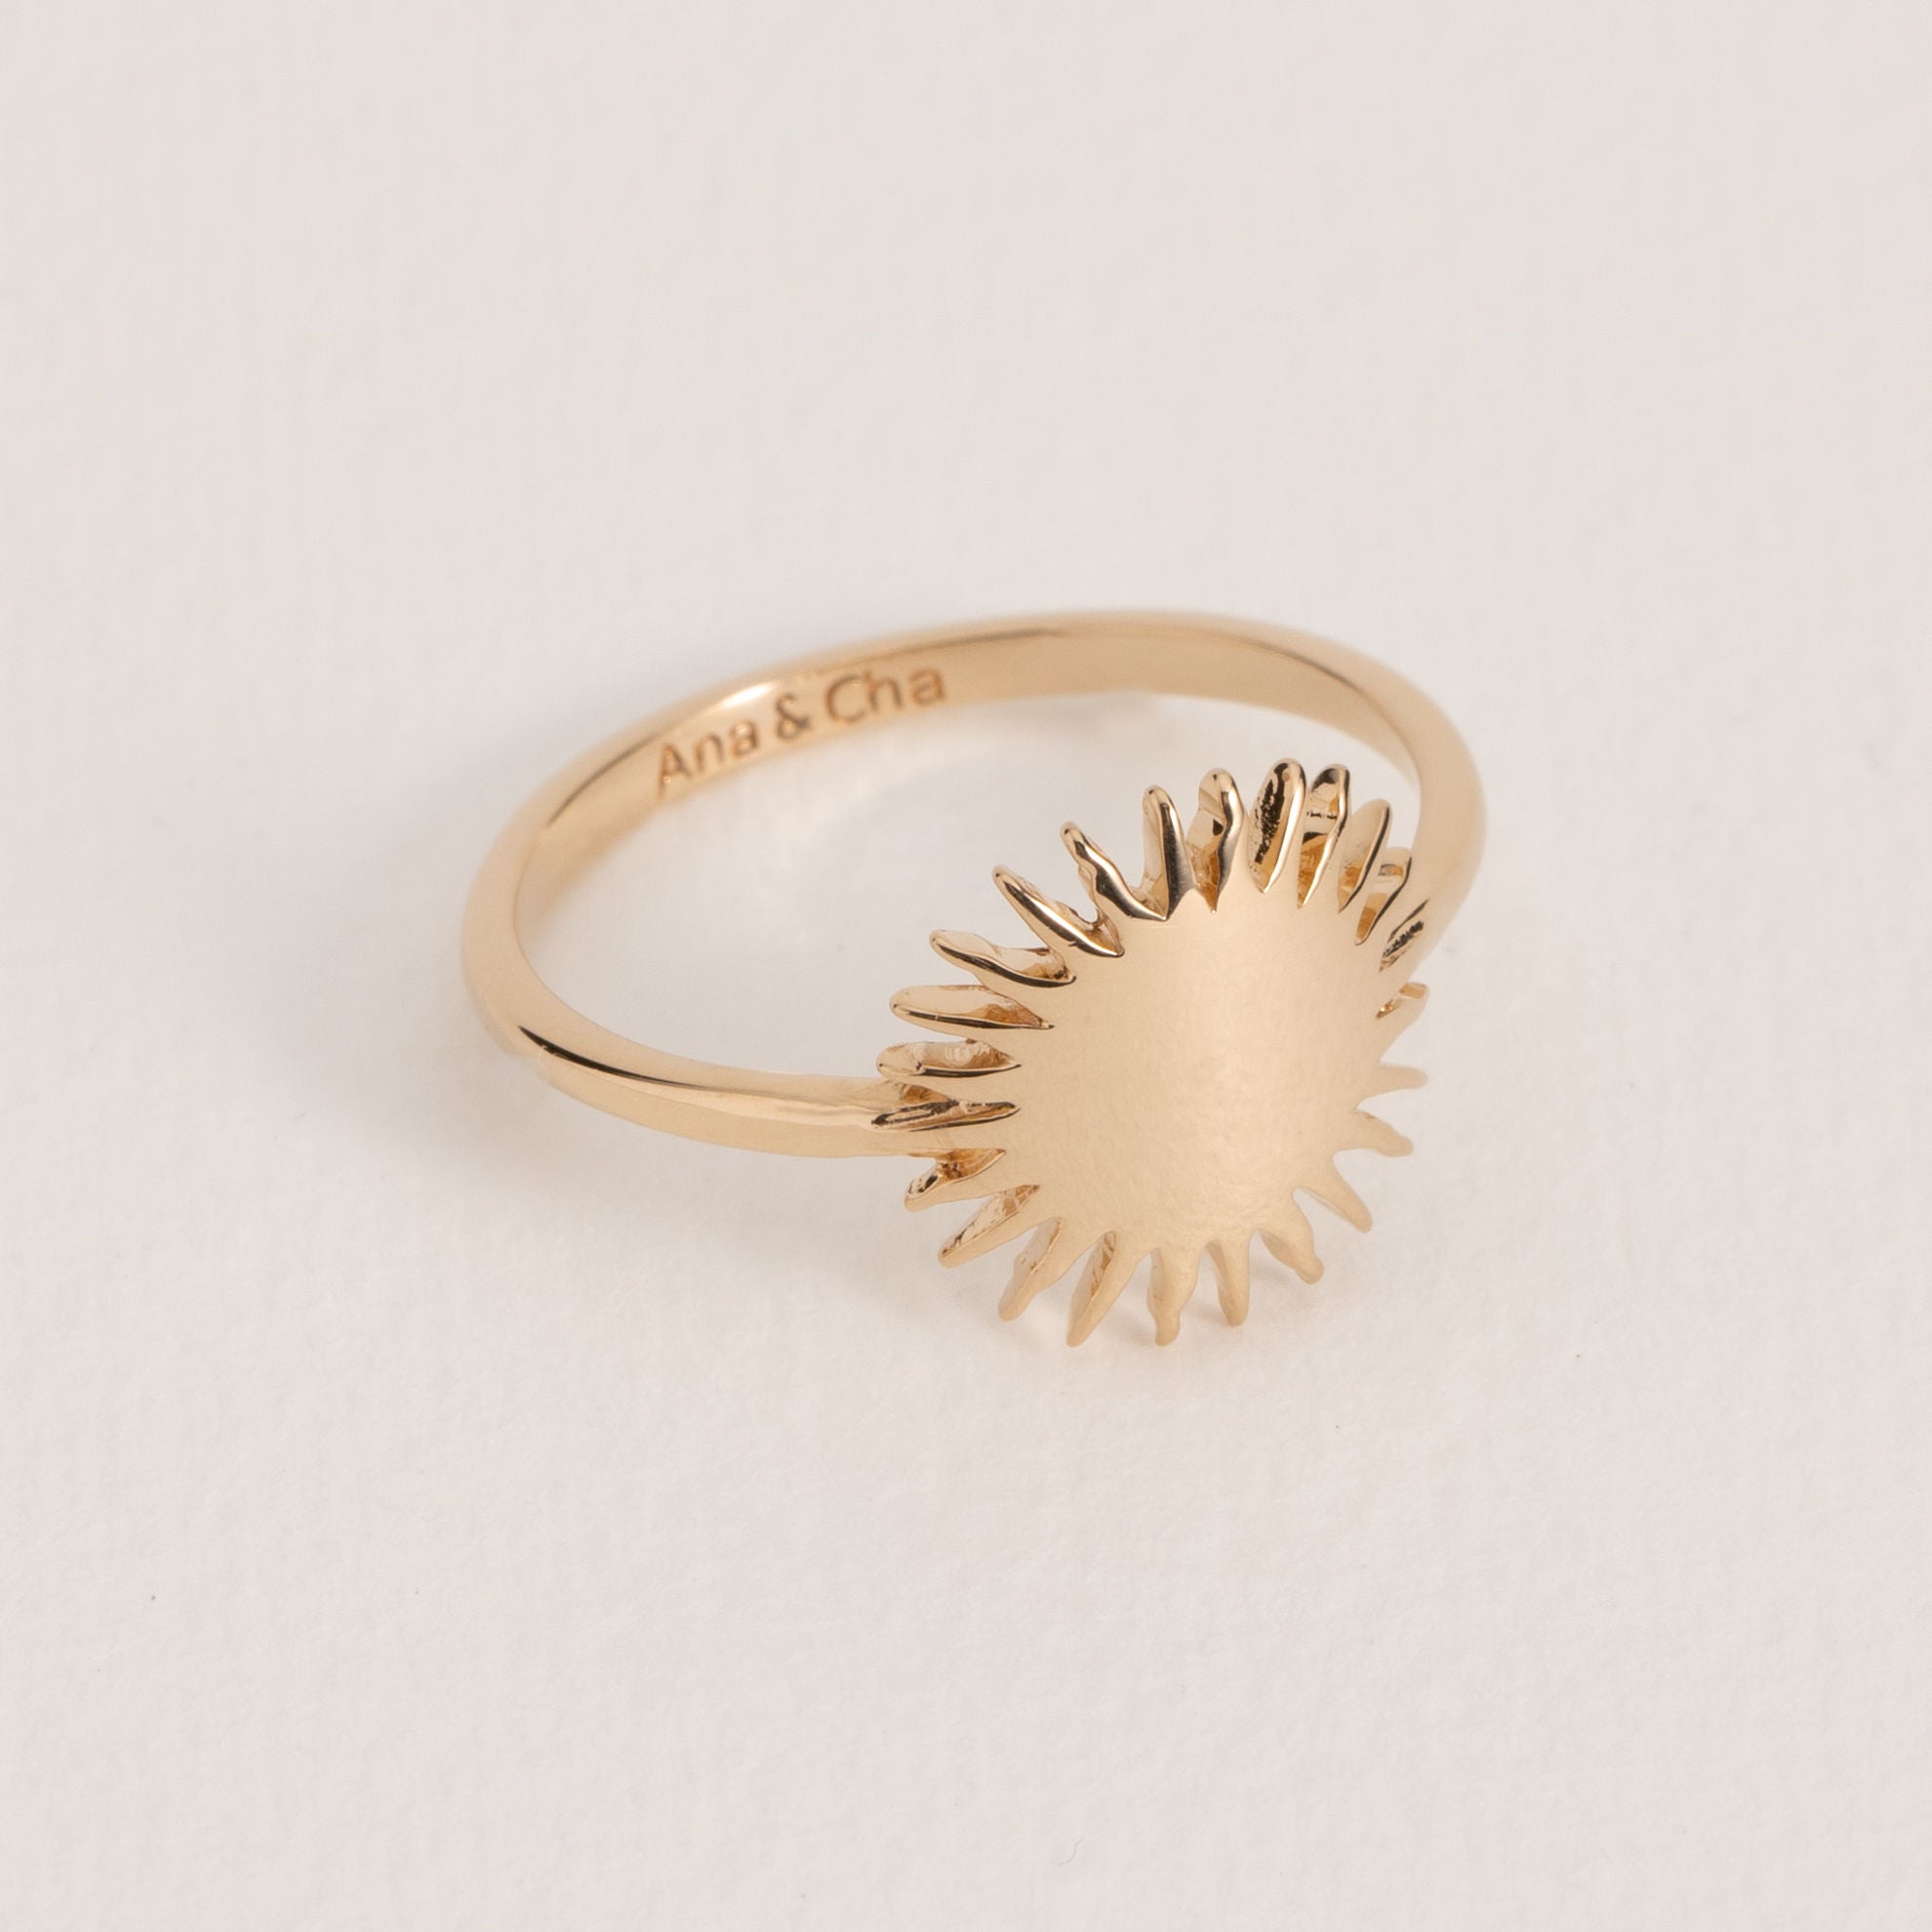 Bianca - Gold Plated Ring - Ana and Cha